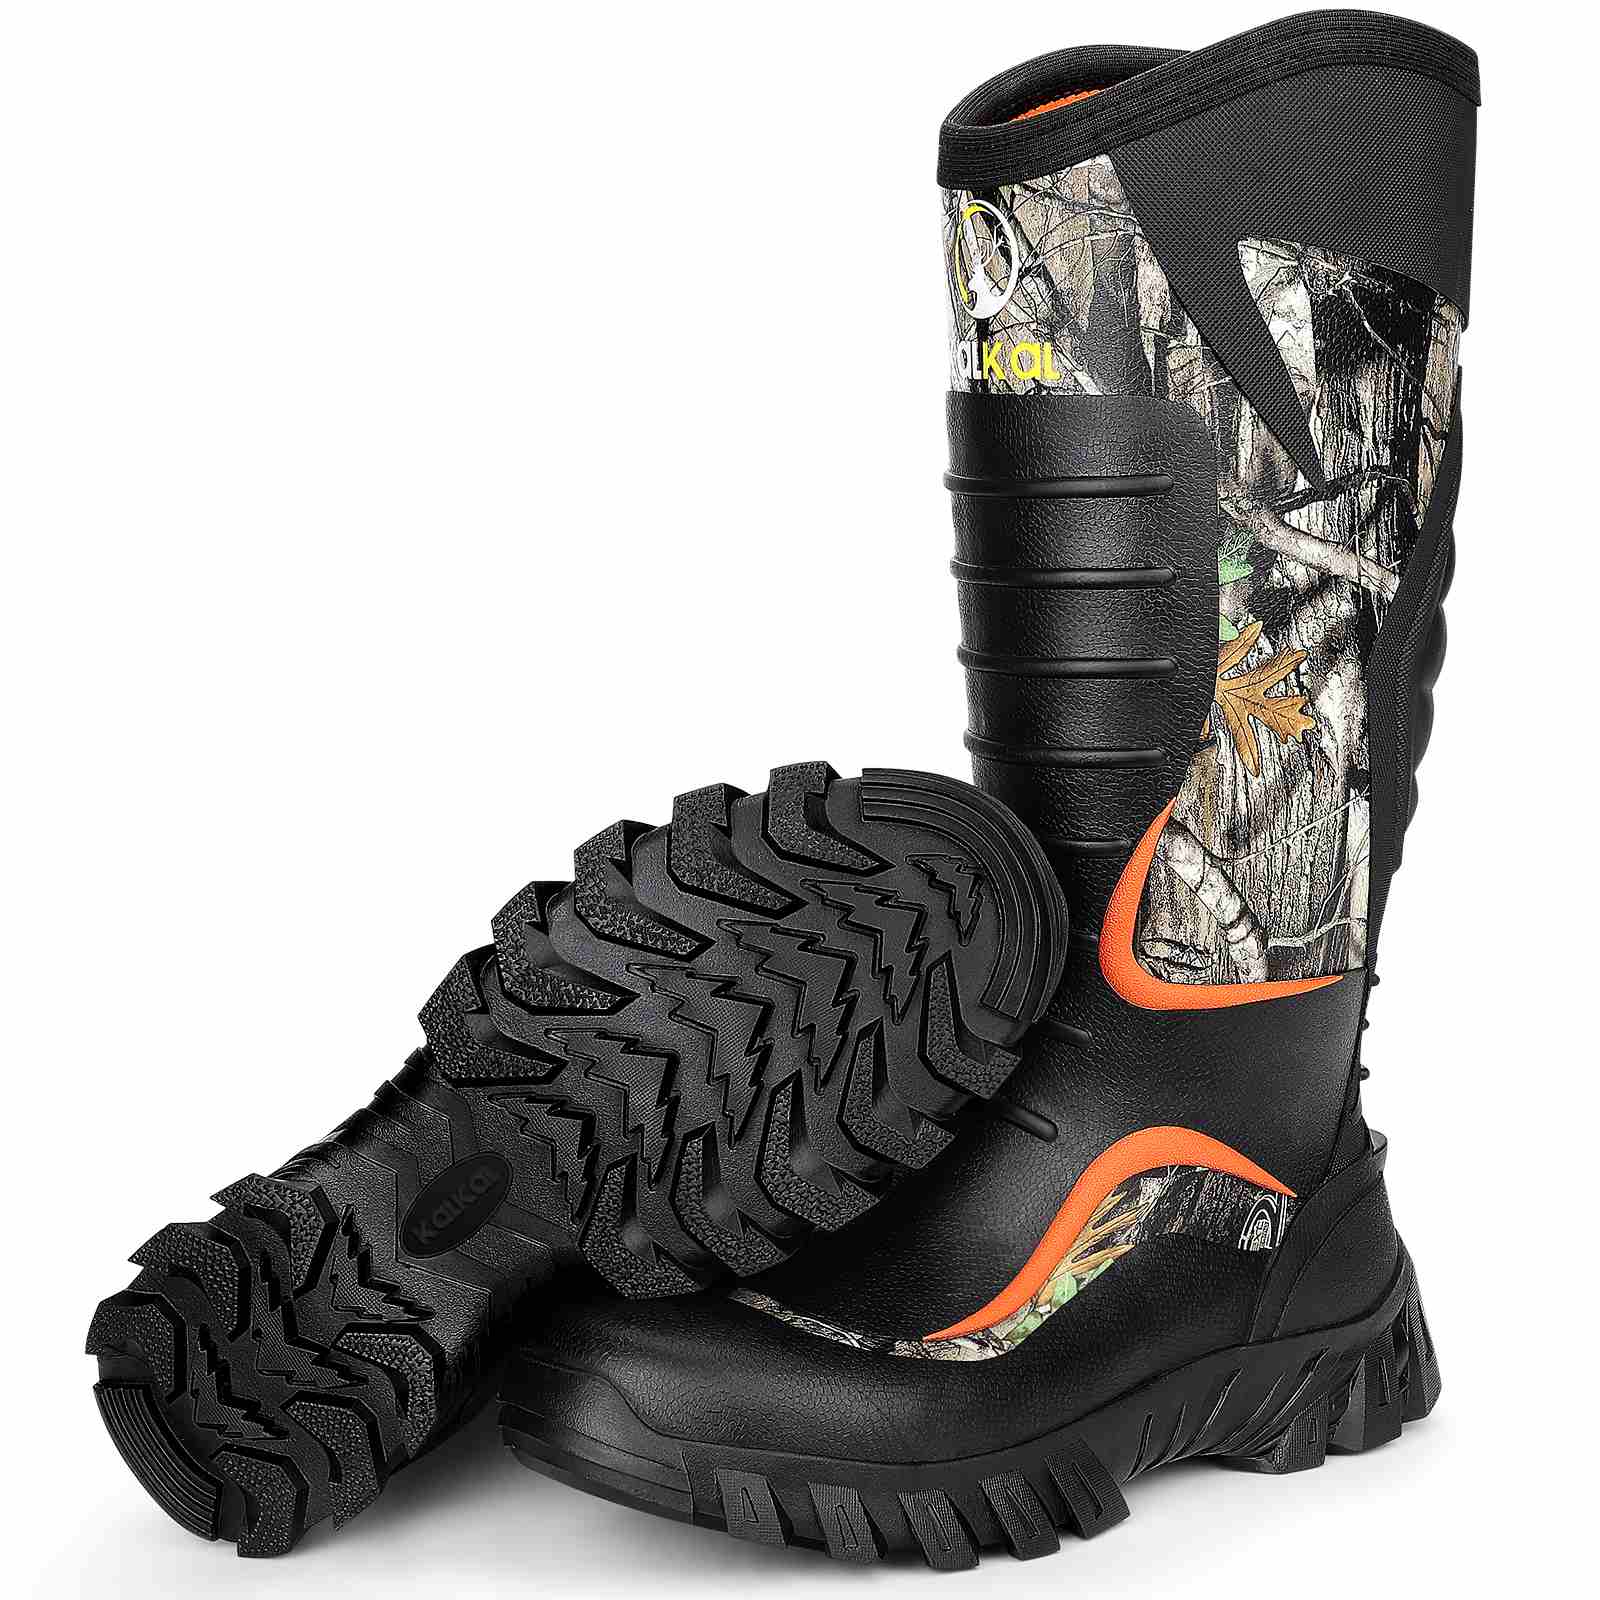 kalkal insulated winter hunting boots for men